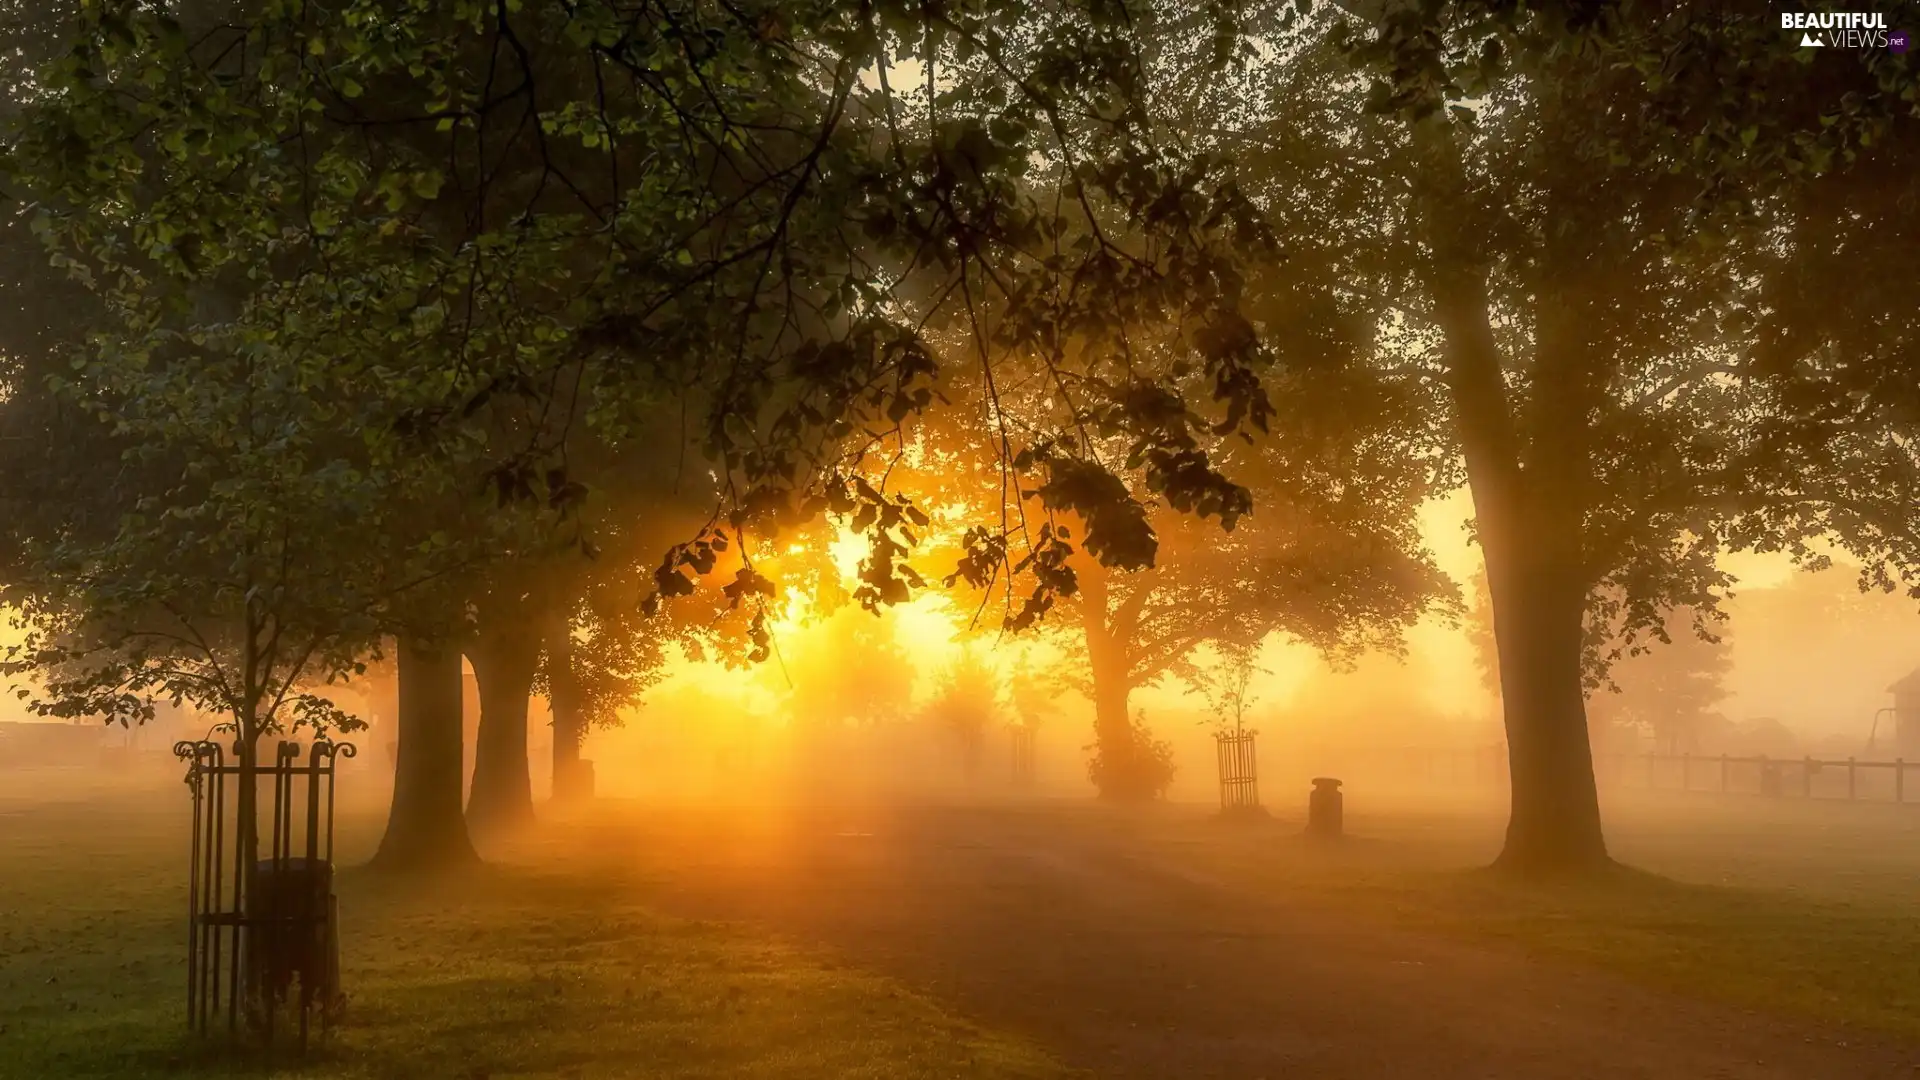 viewes, Way, sunny, glamour, Fog, trees